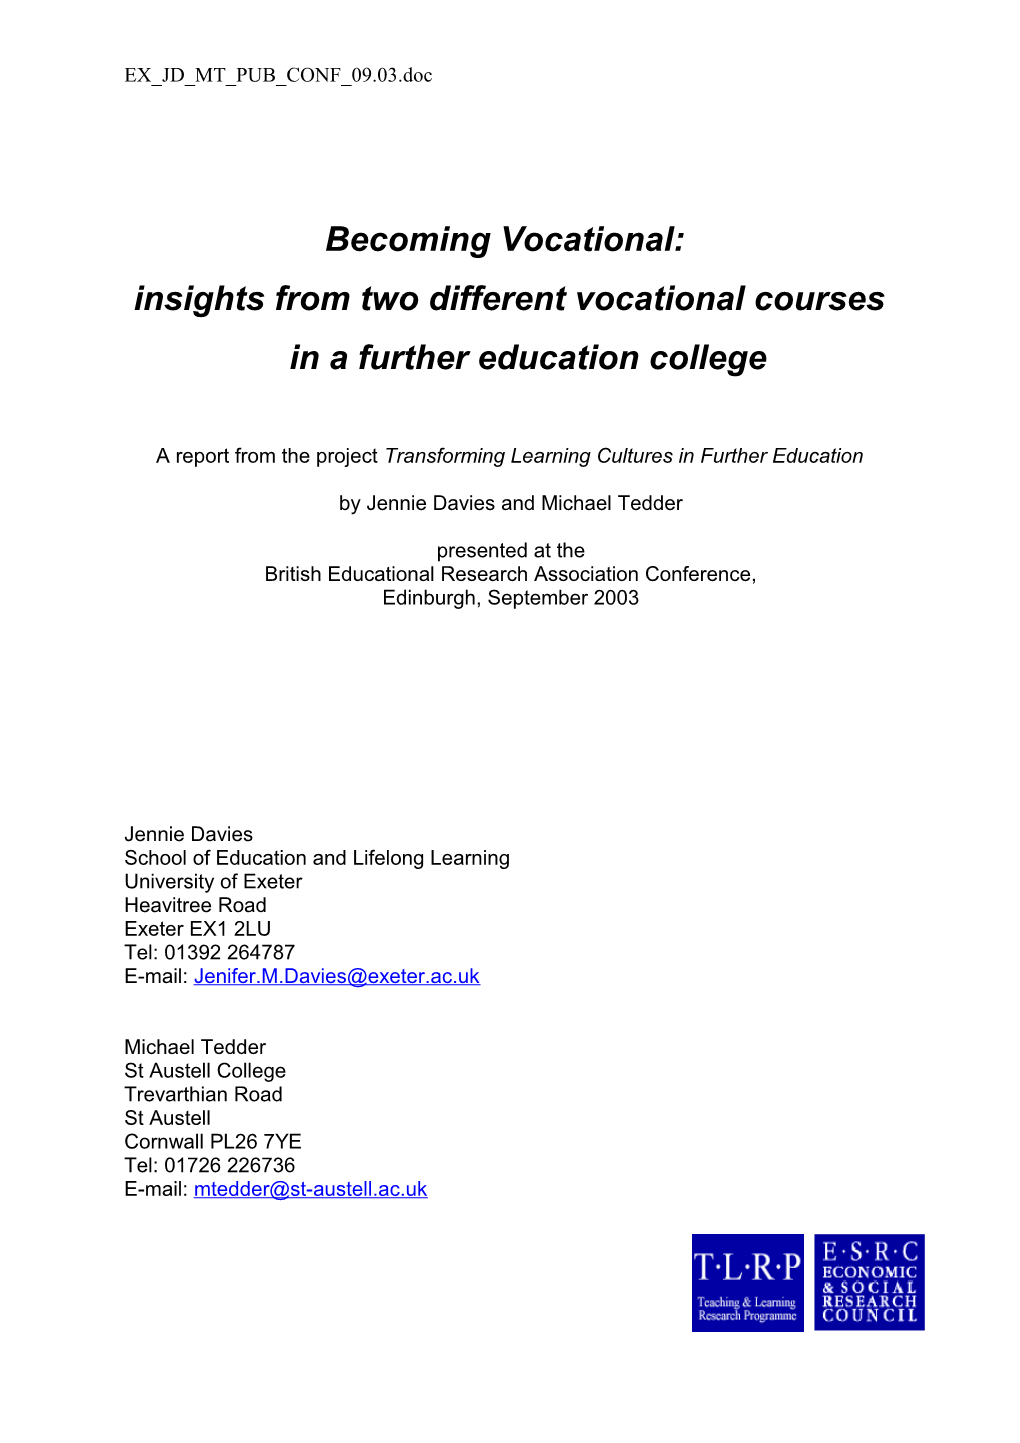 Insights from Two Different Vocational Courses in a Further Education College